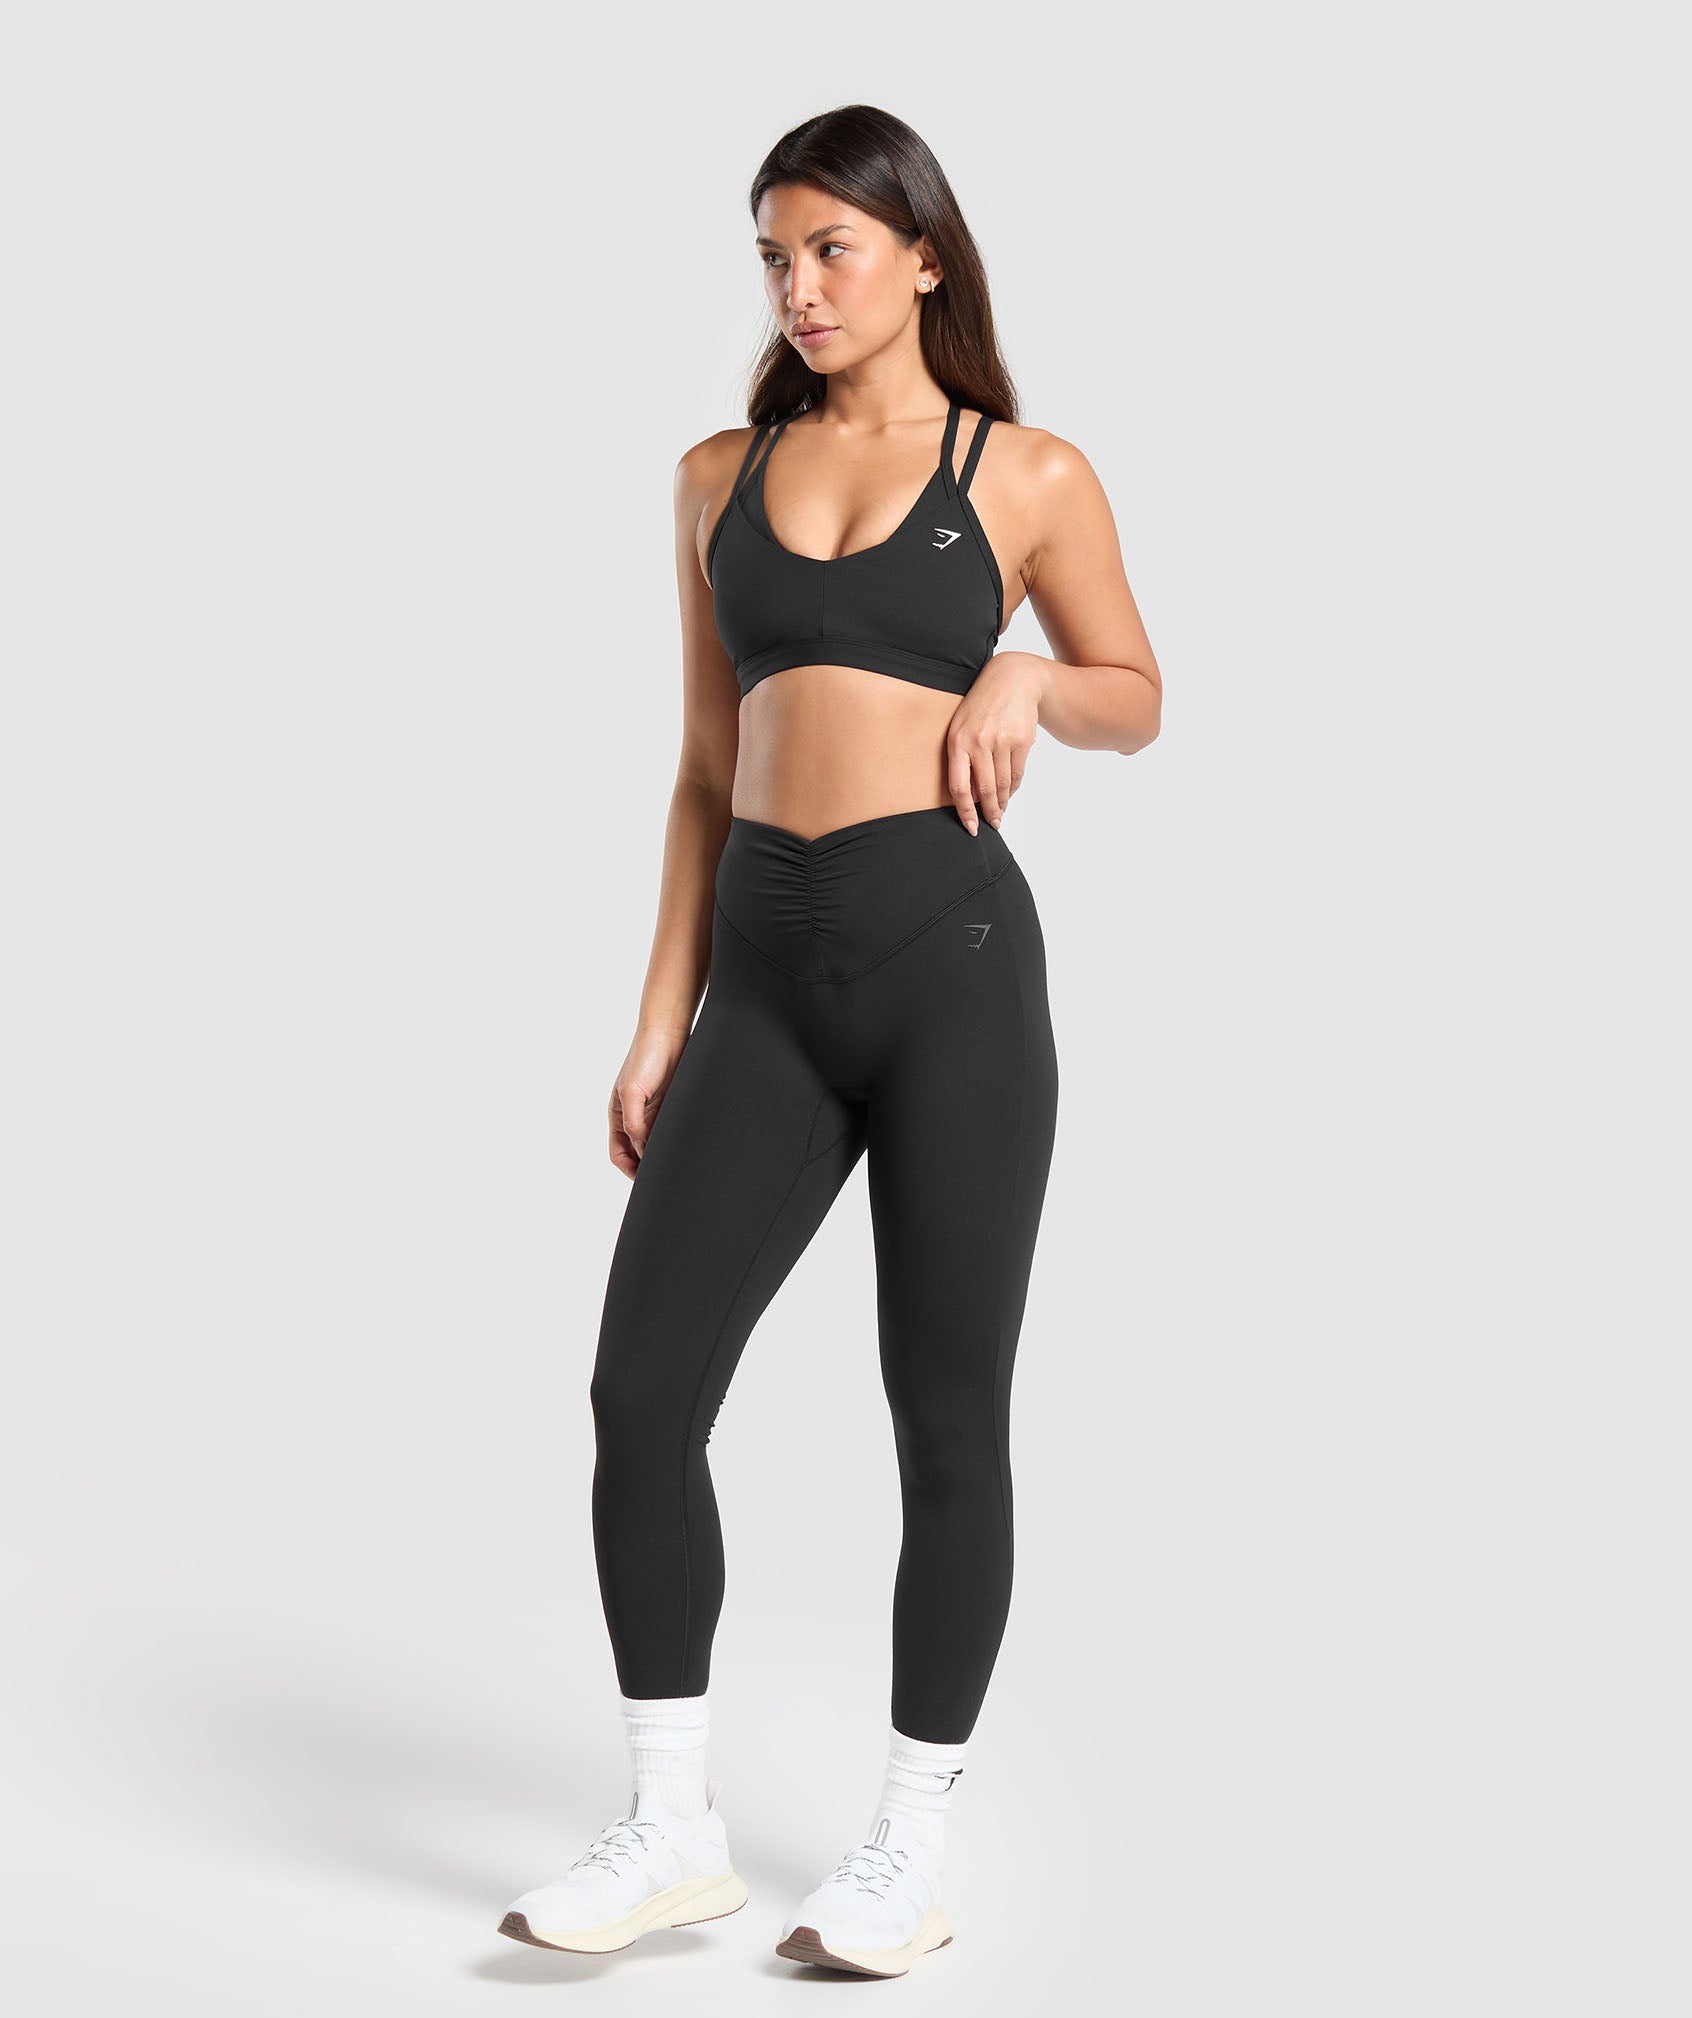 Double Up Sports Bra in Black - view 4